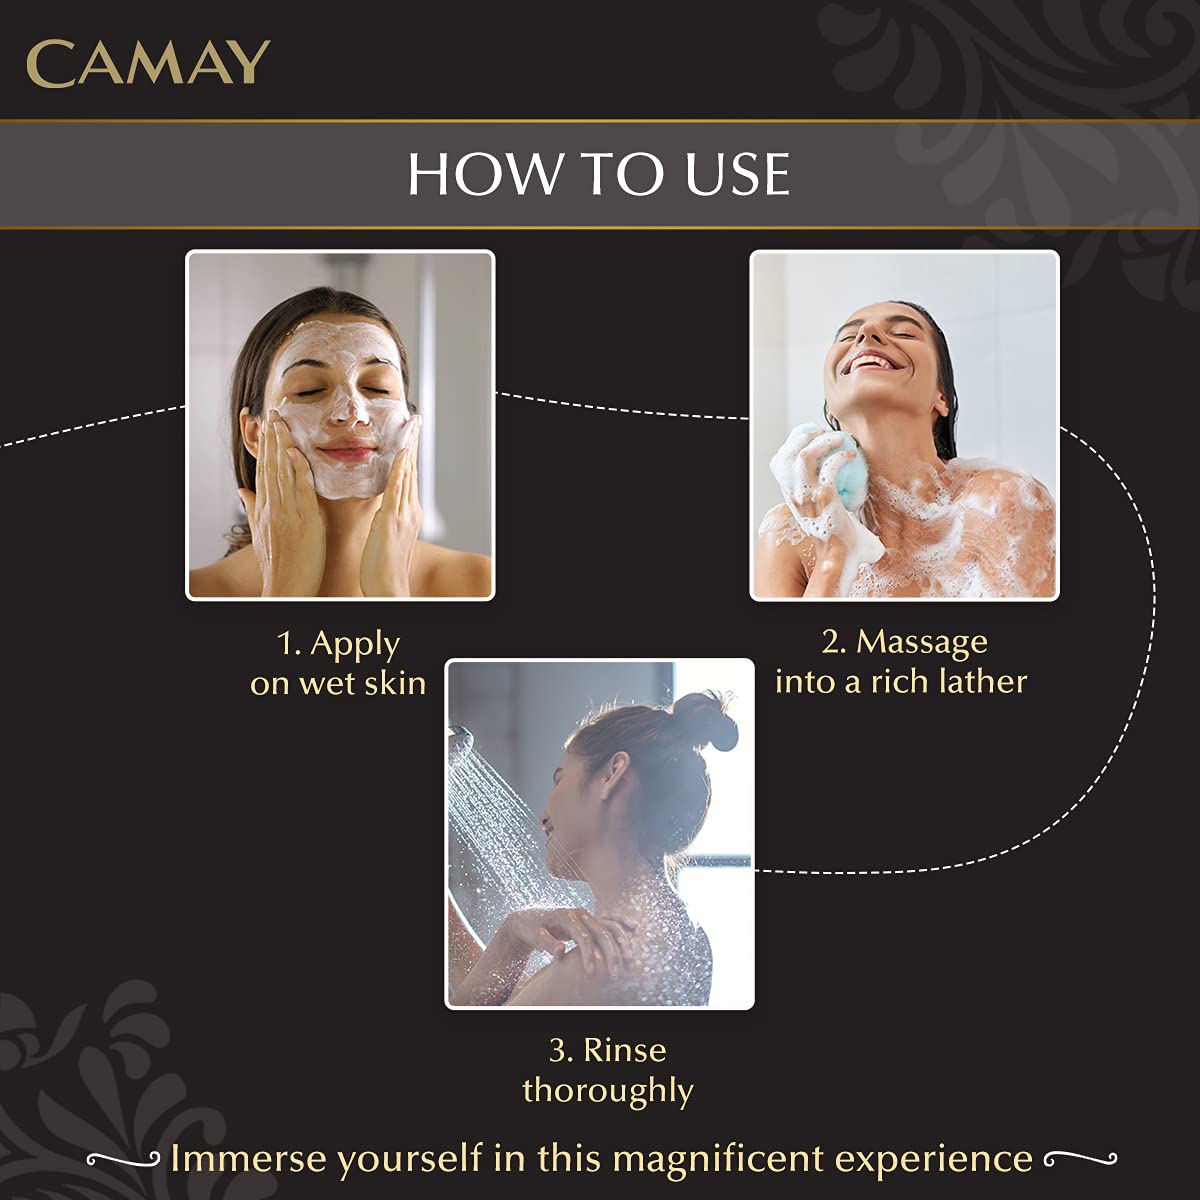 CAMAY CHIC INTERNATIONAL BEAUTY BAR WITH ELEGANT SCENT (3nx125gm)